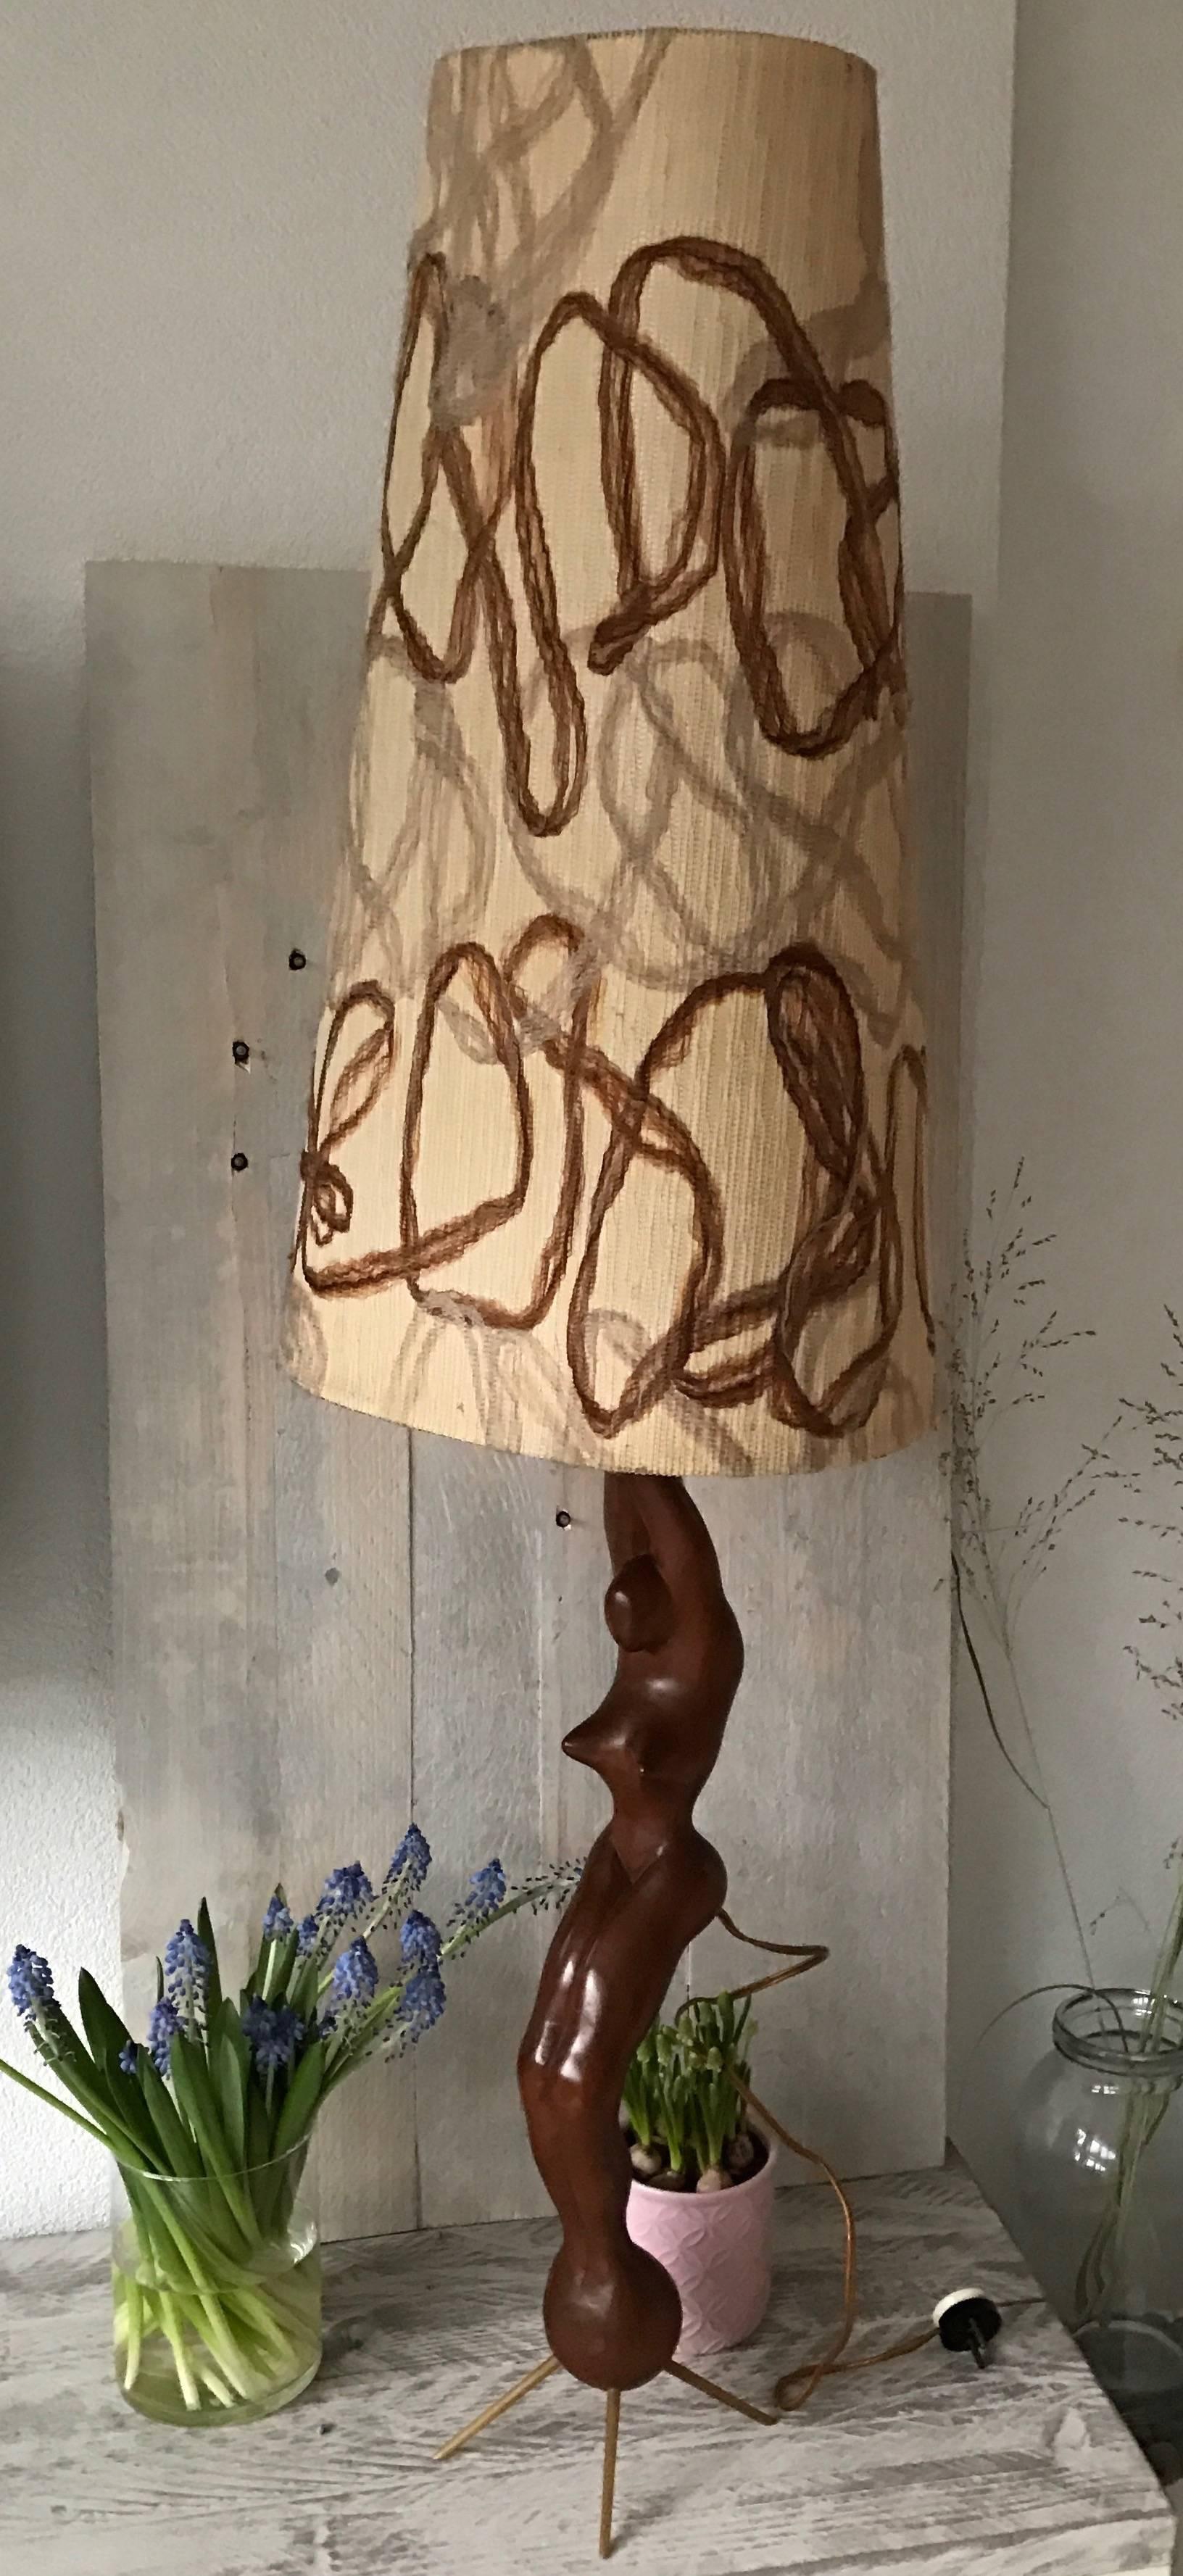 Beautifully shaped from top to bottom.

This hand-carved and stylish table or floor lamp is crafted out of one solid piece of teakwood. The natural grain in this beautiful hardwood accentuates the expressive and already exaggerated forms of this